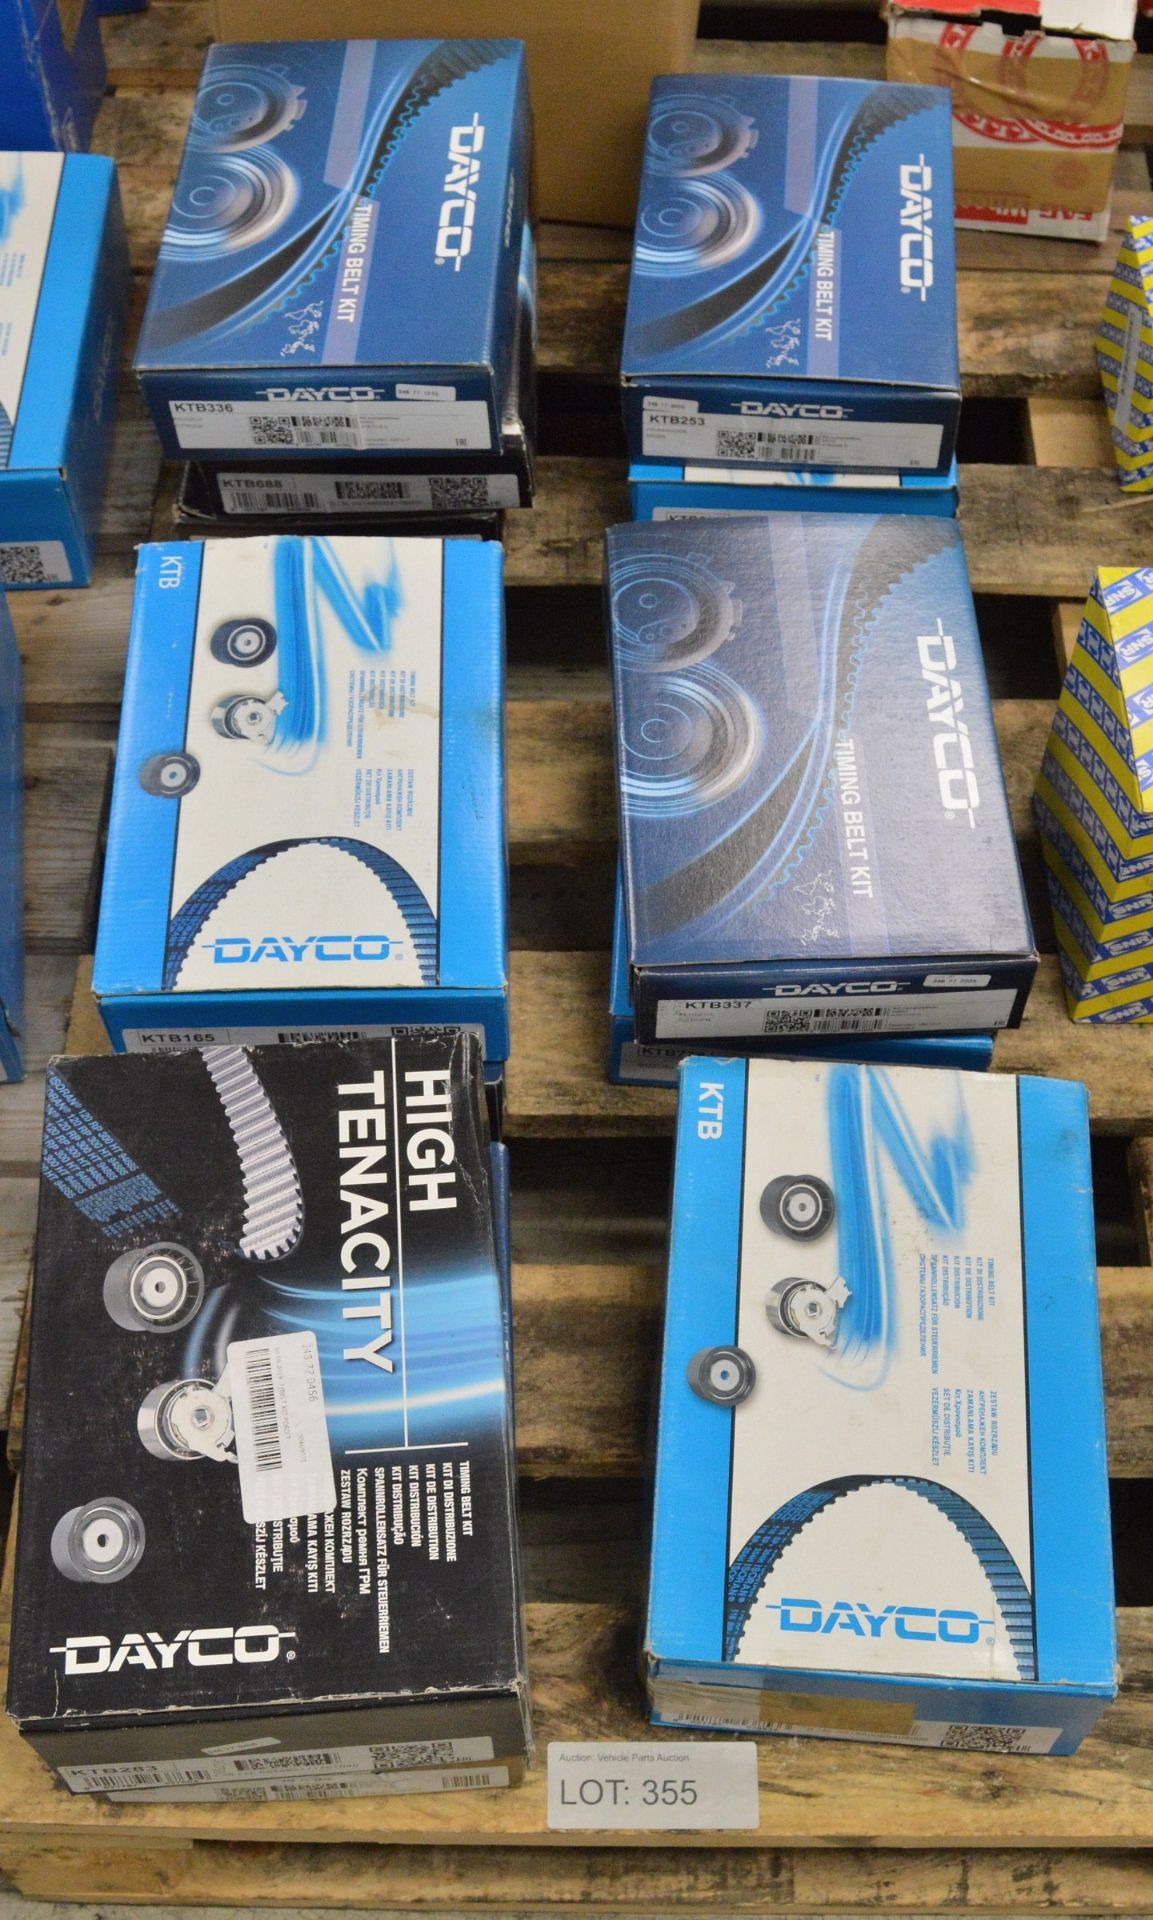 Dayco Timing Belt Kits - See photos for part numbers - Image 2 of 3